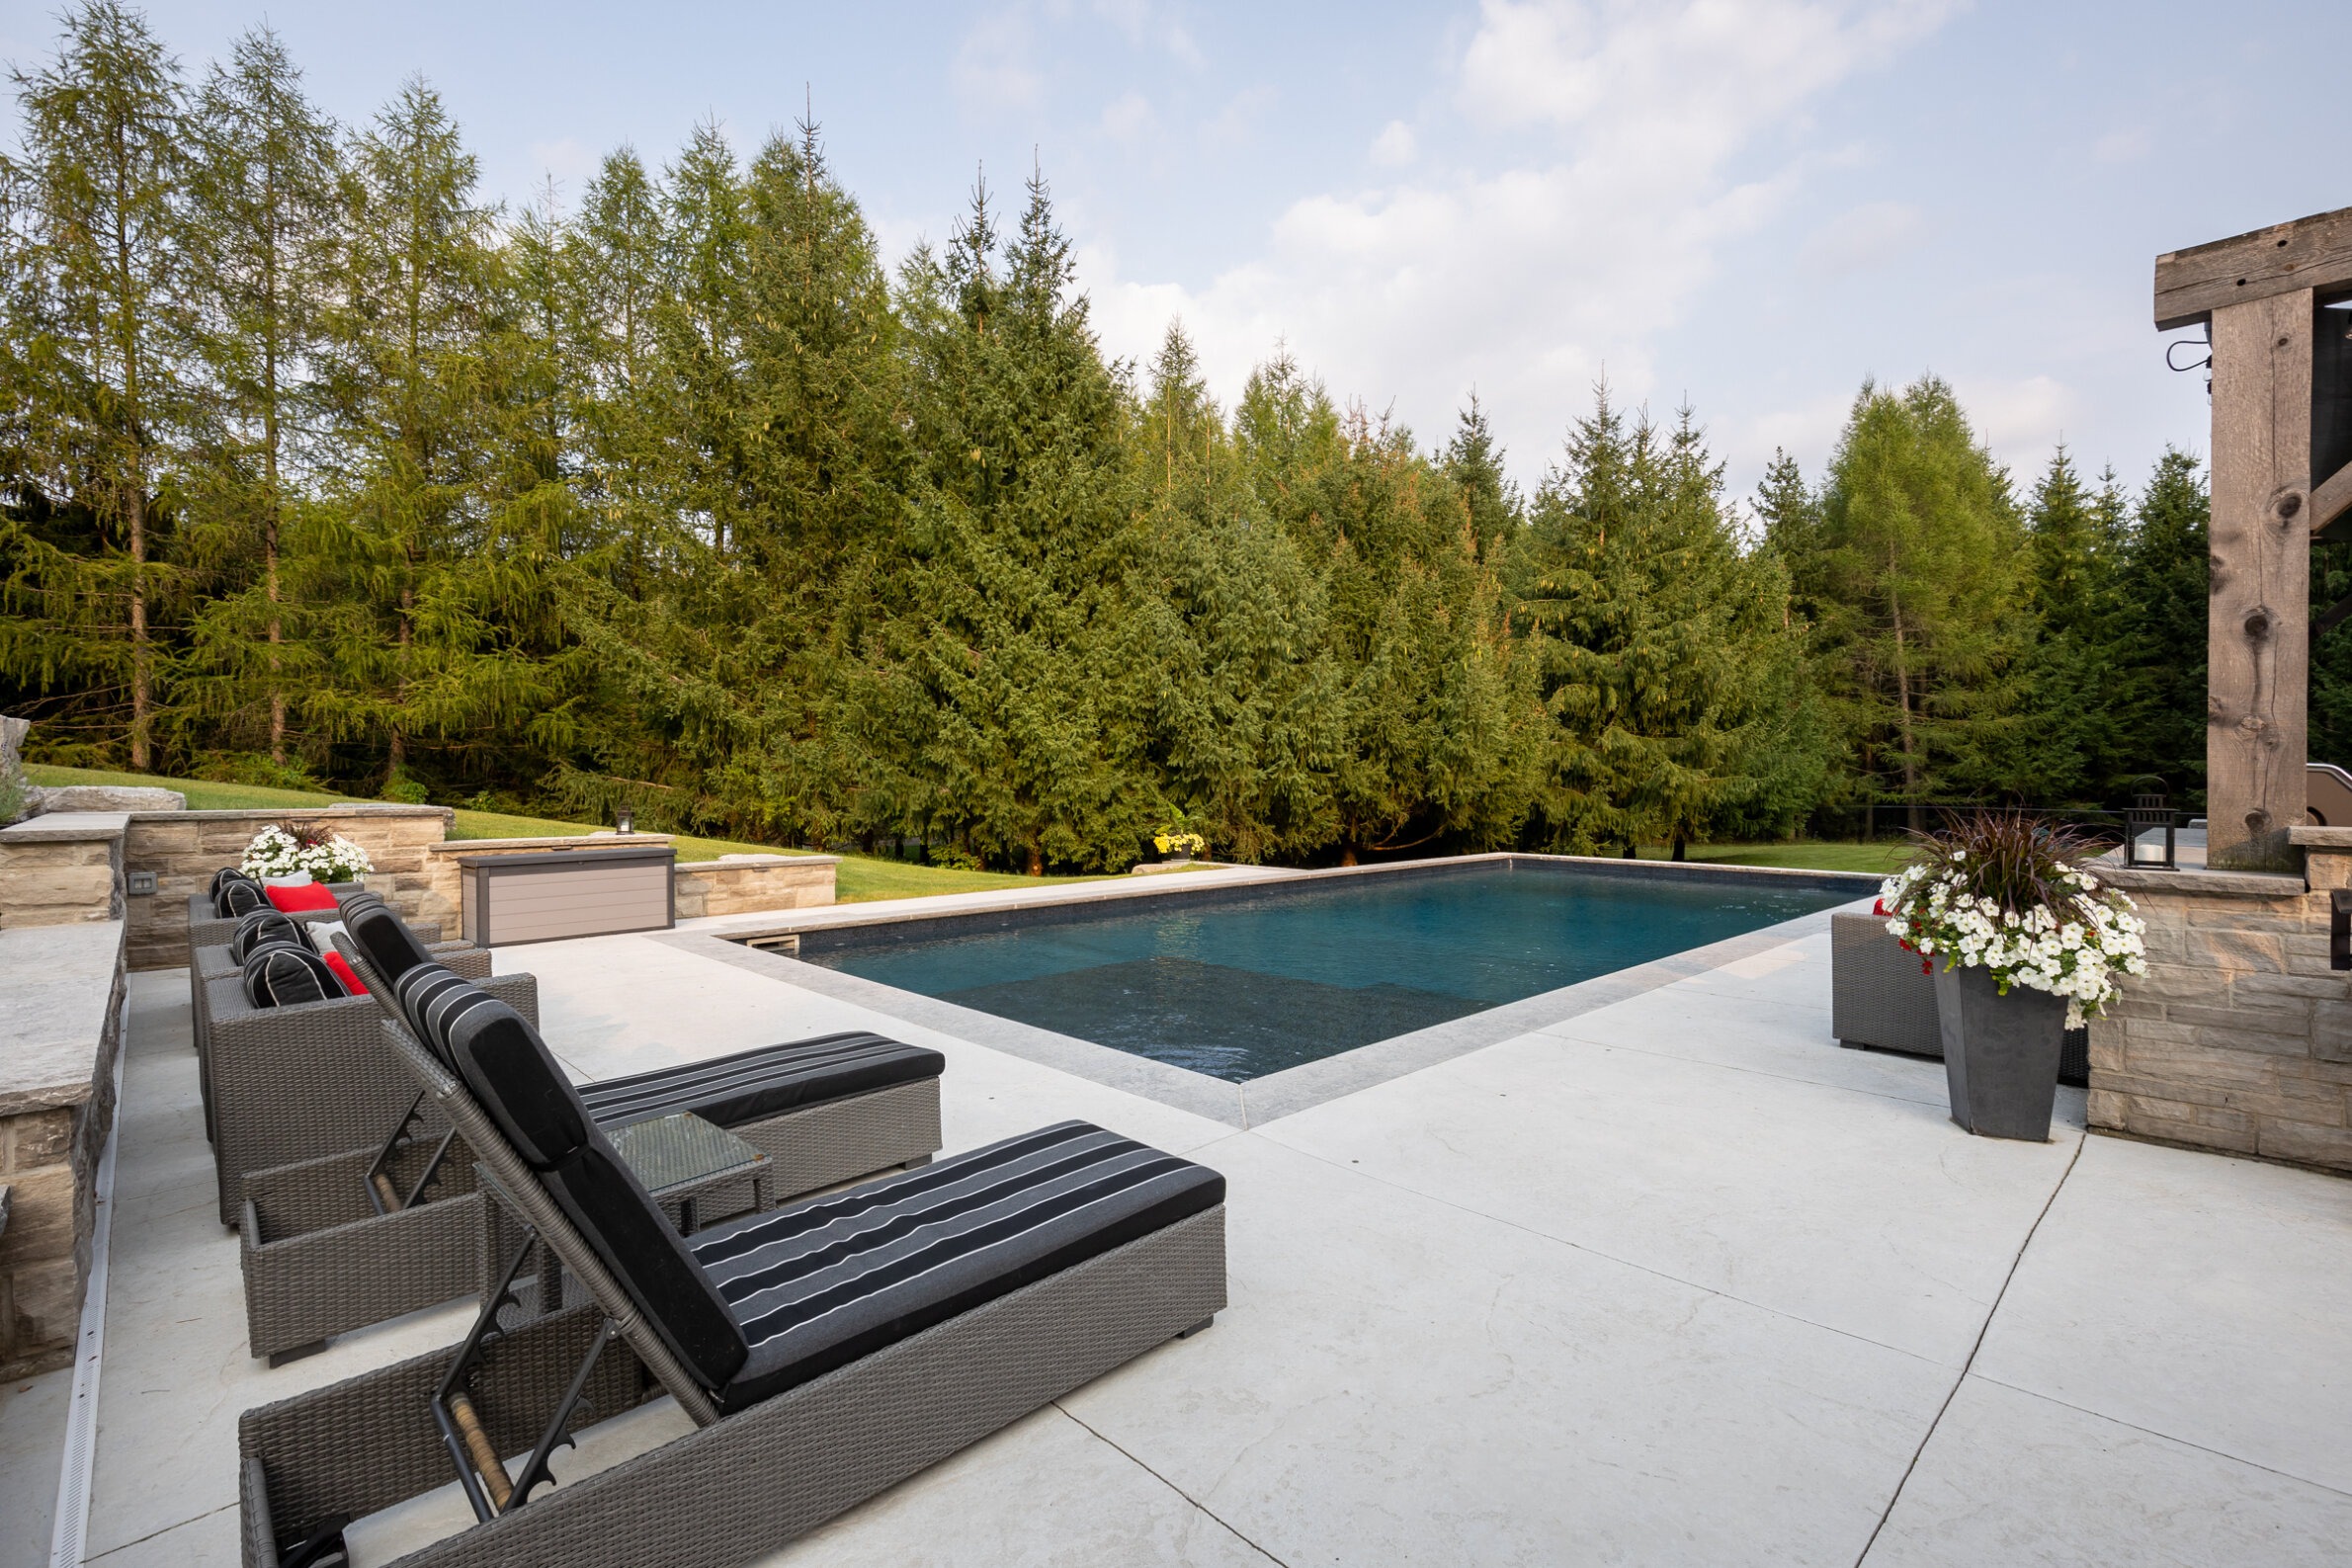 Luxurious outdoor pool with dark water, surrounded by trees, featuring lounge chairs, a fire pit, and a clear sky at dusk or dawn.